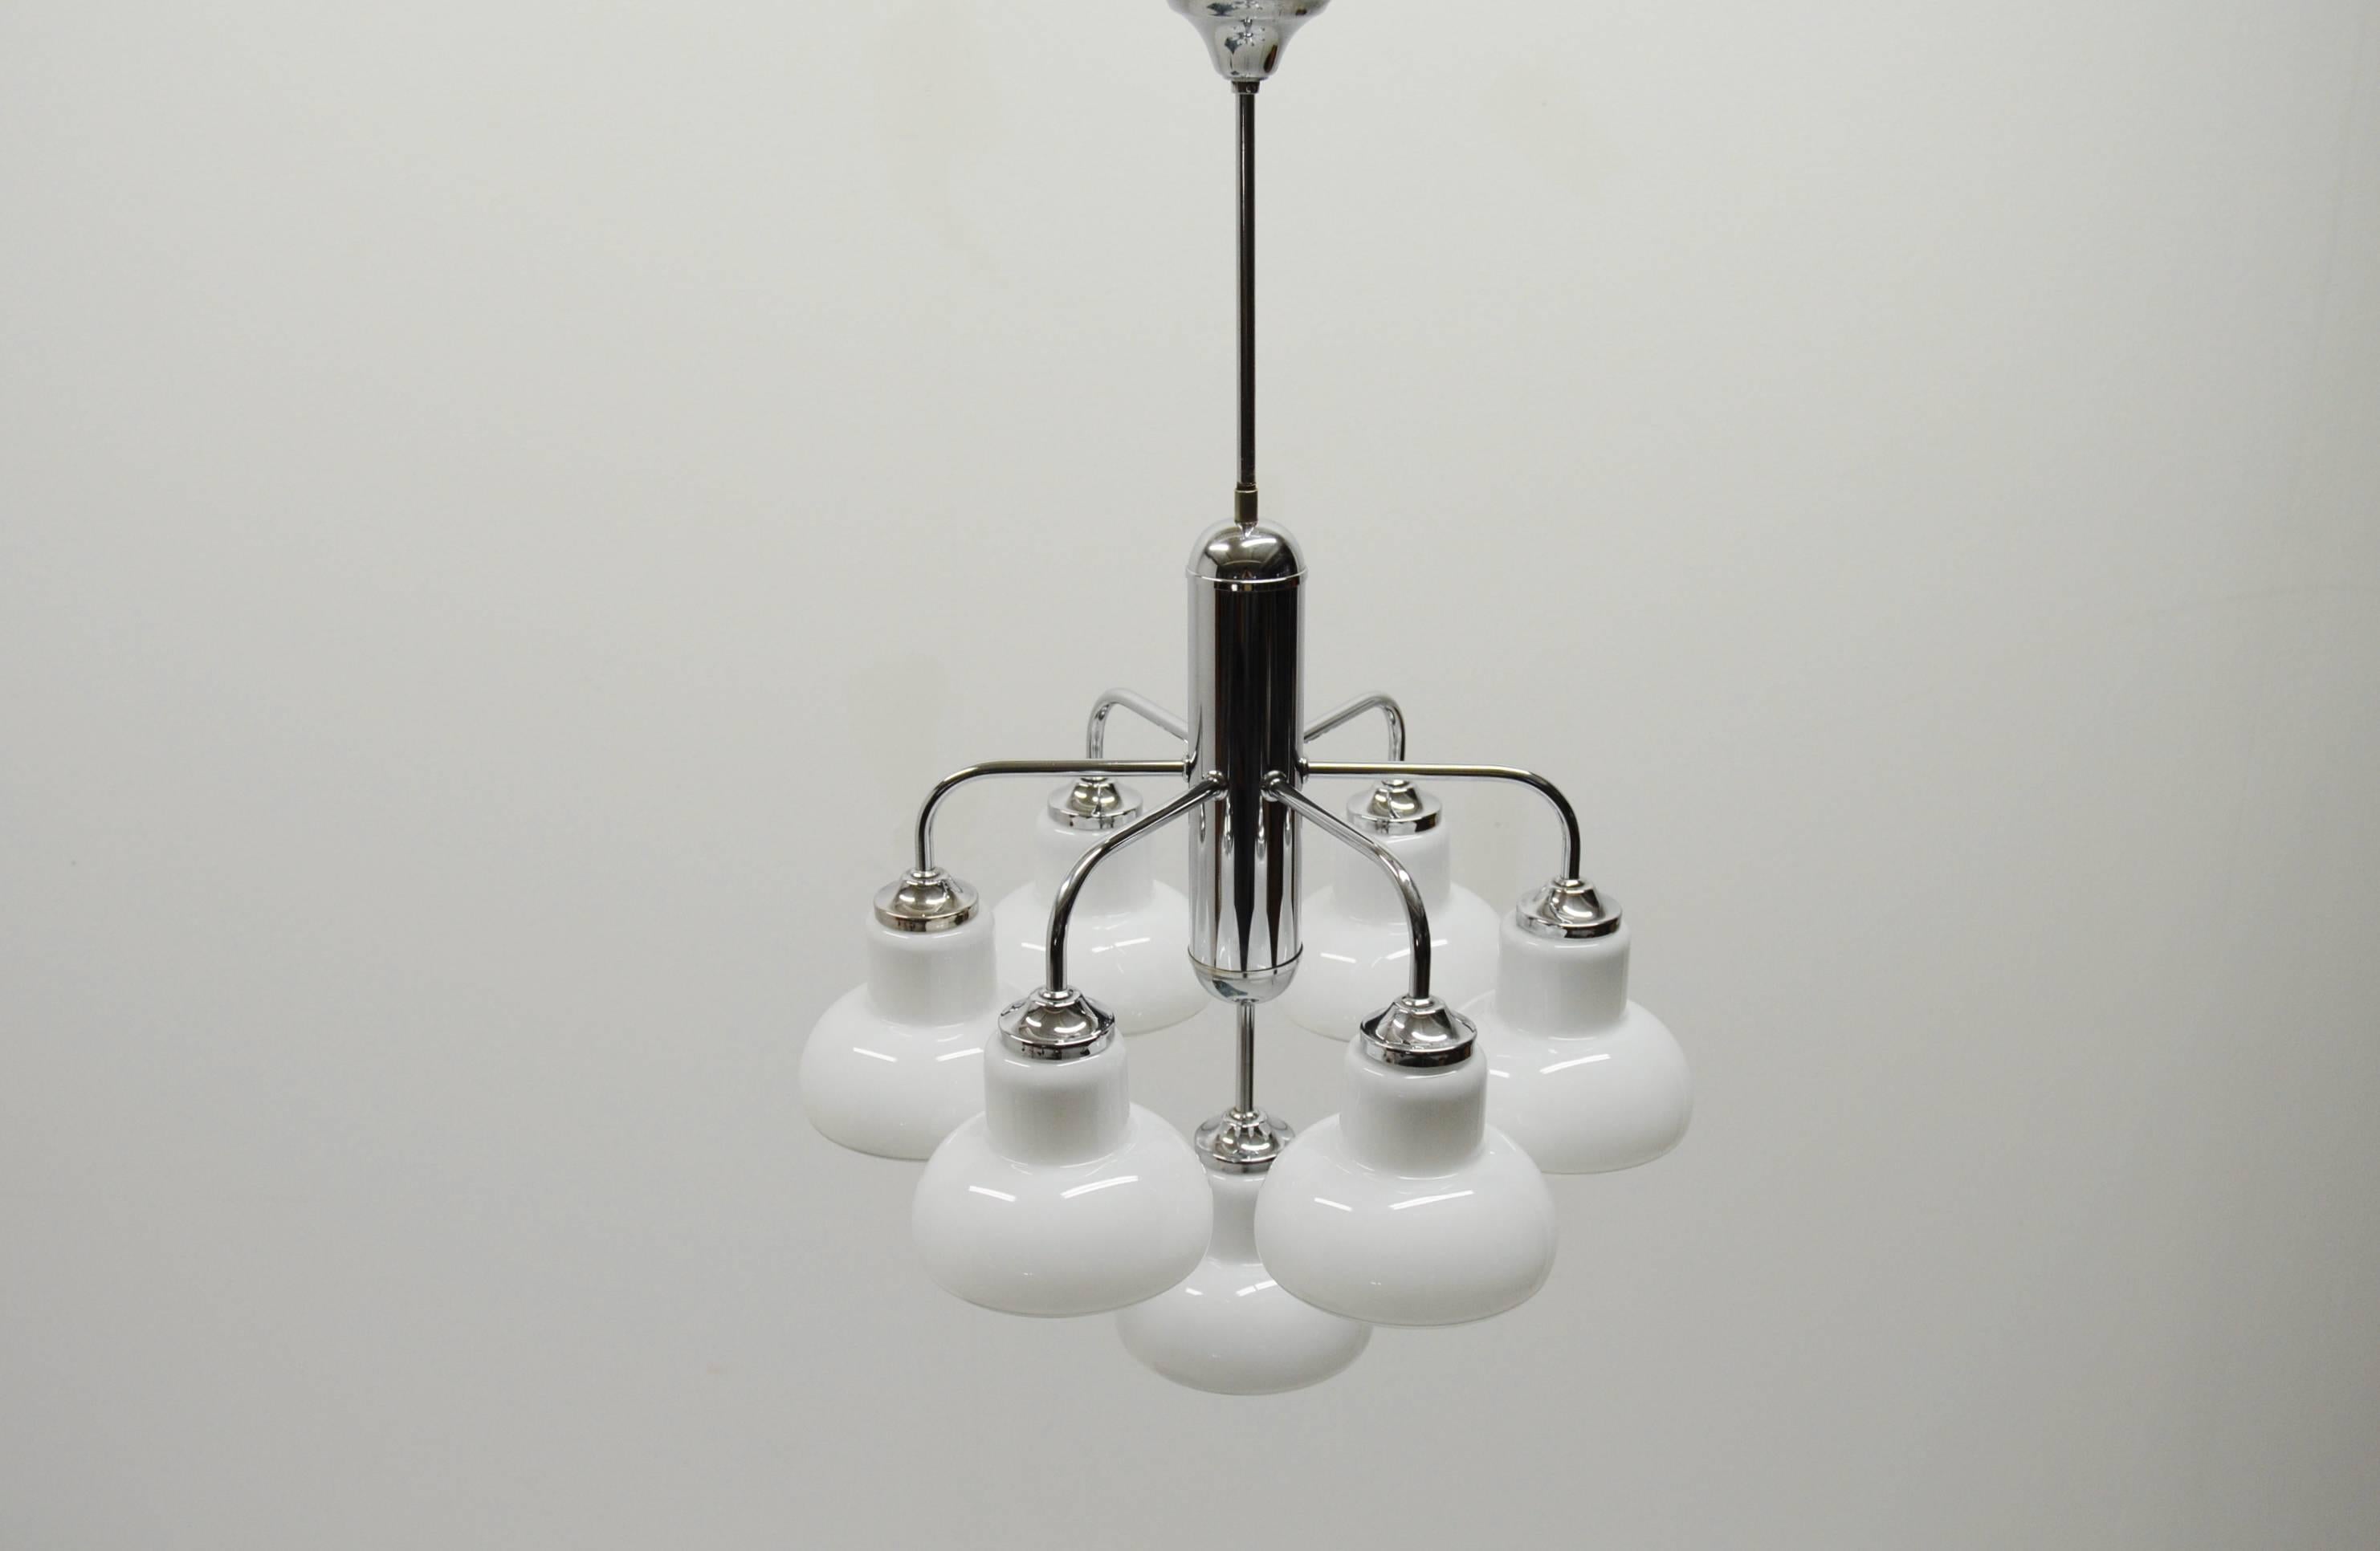 High-class Art Deco chandelier with shiny chrome and silver detailed glass cups. Elegant and sober design by unknown manufacturer.

Measure: Height 75 cm, diameter 46 cm.